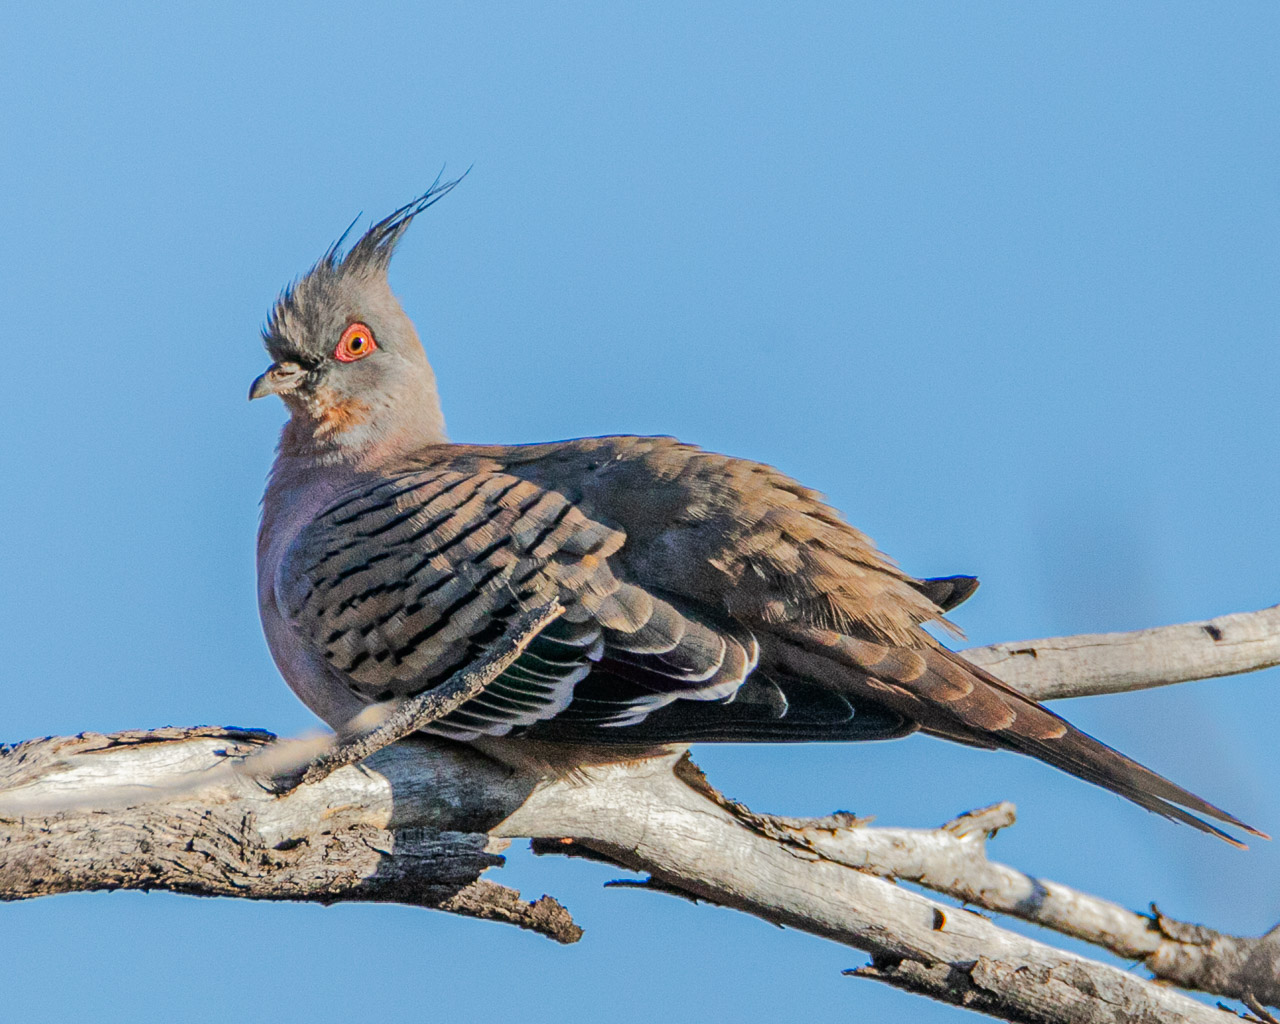 Crested pigeon on a branch